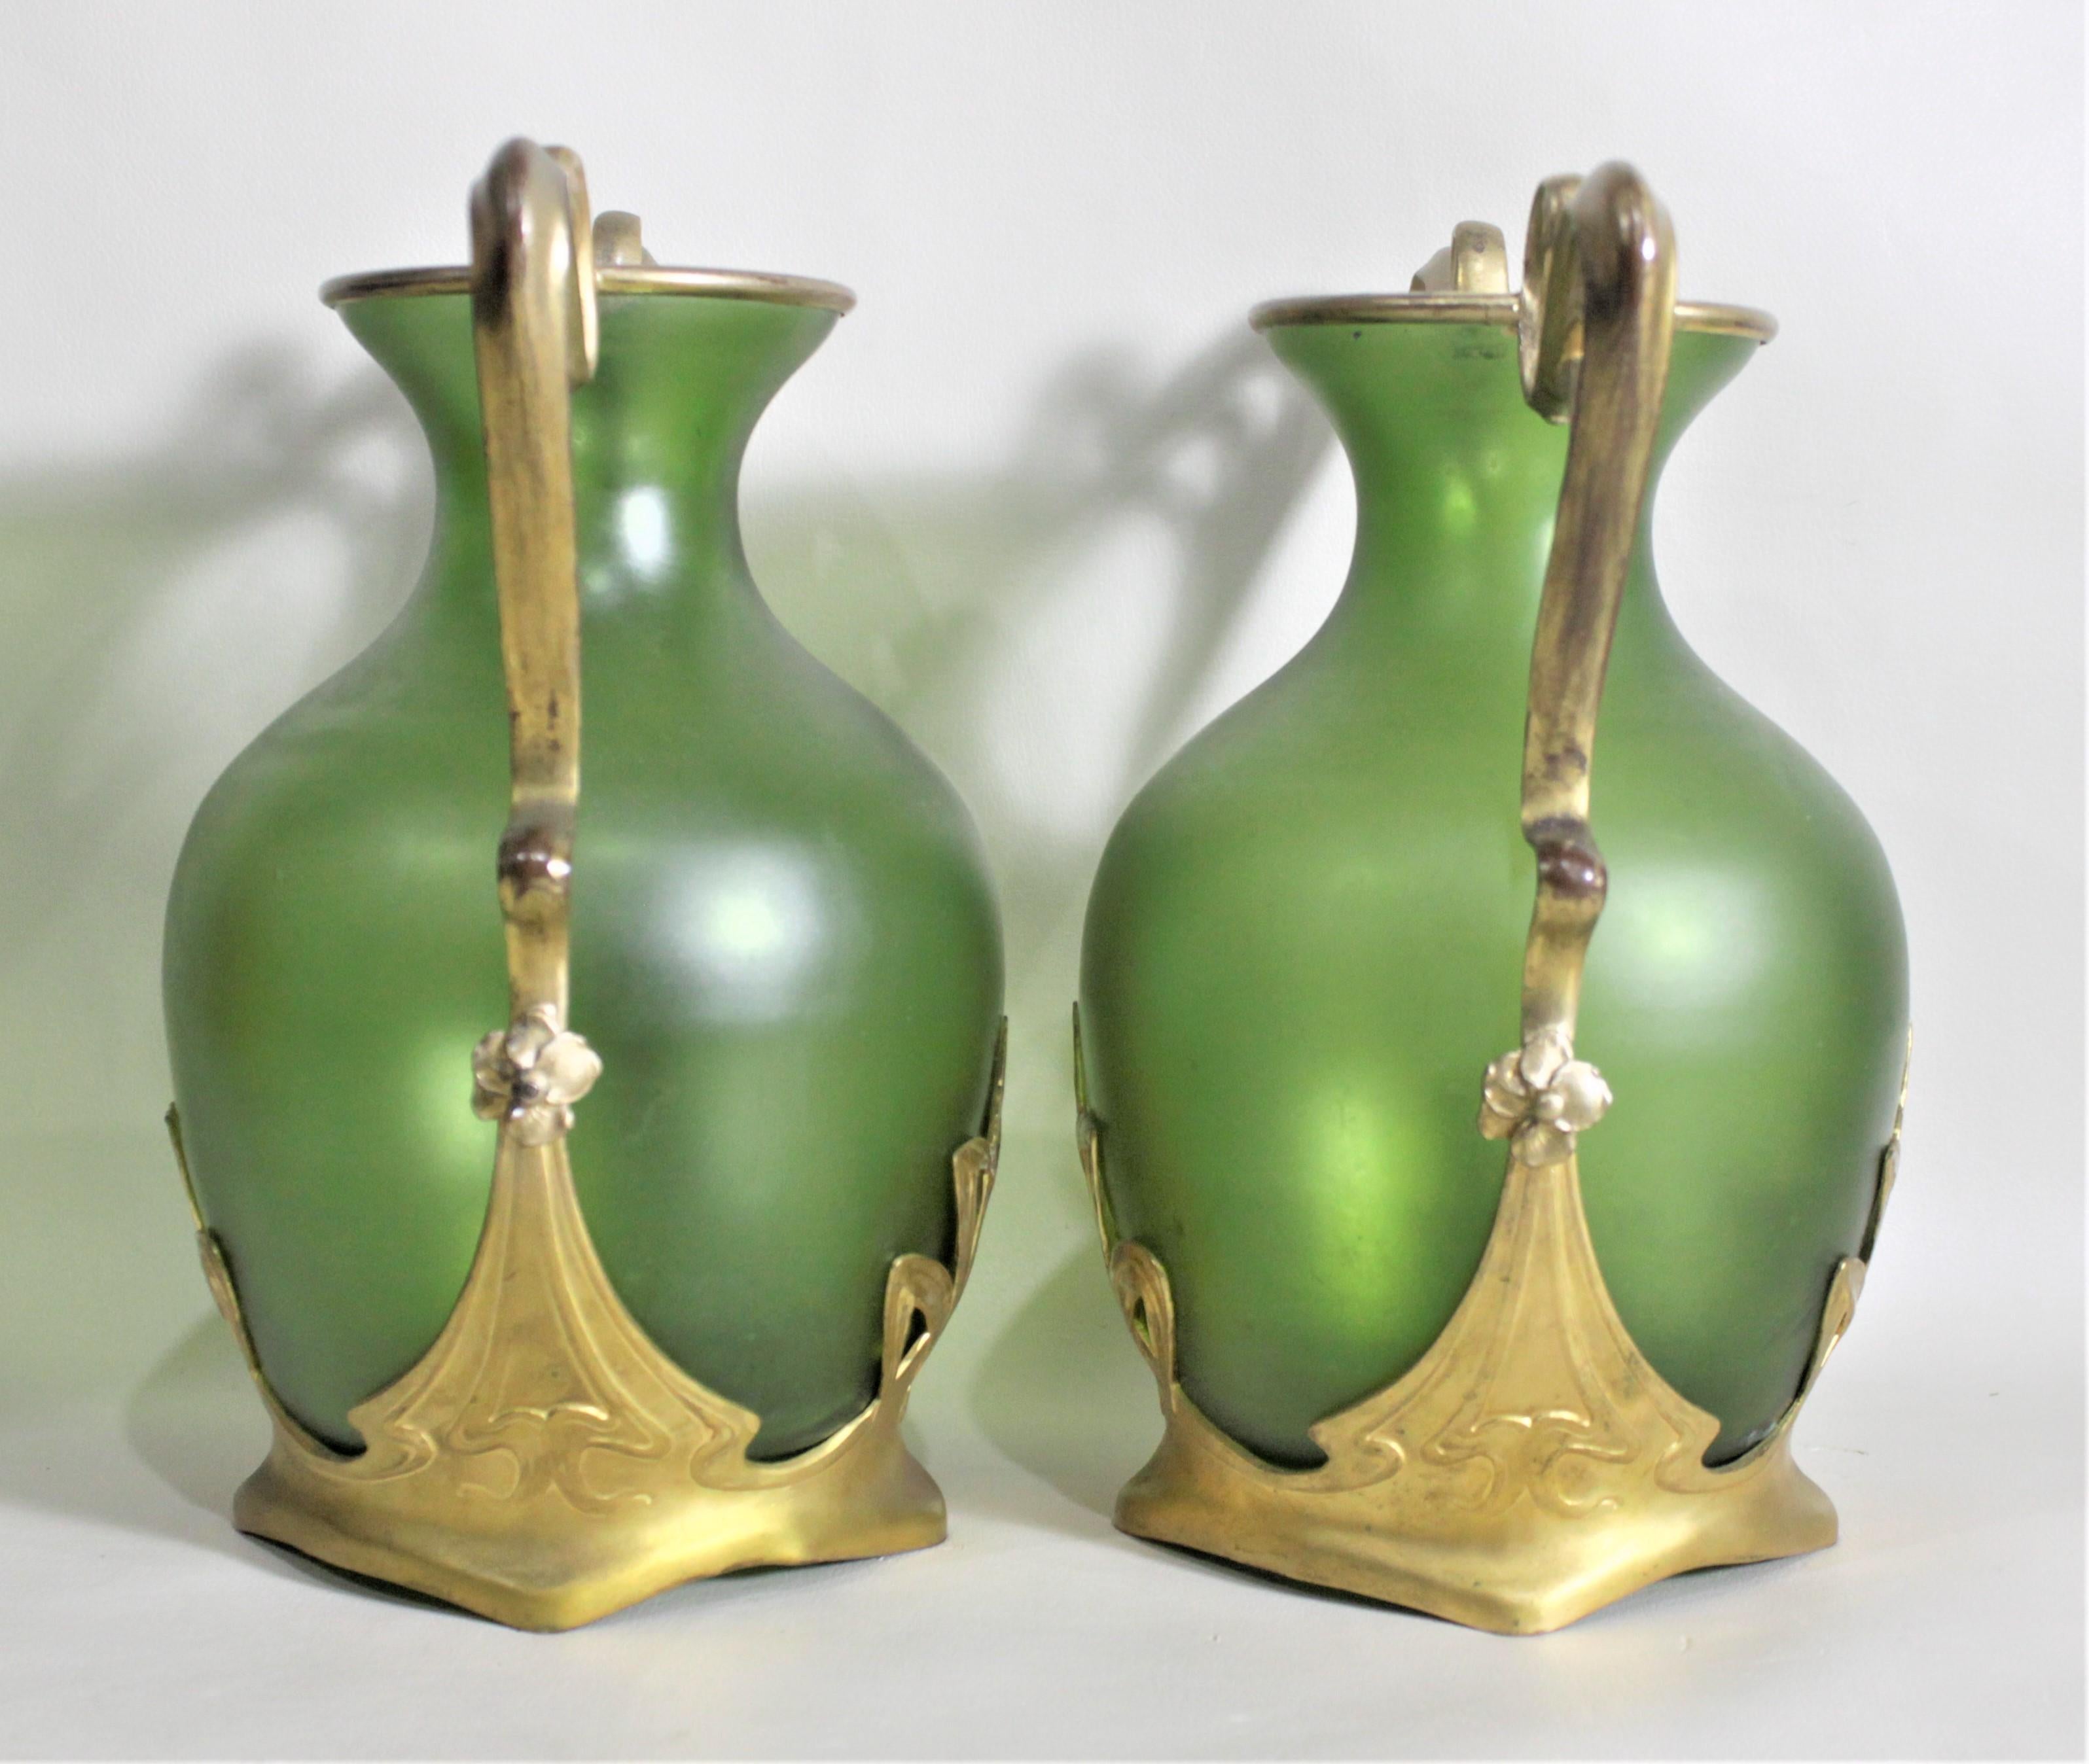 green and gold vases